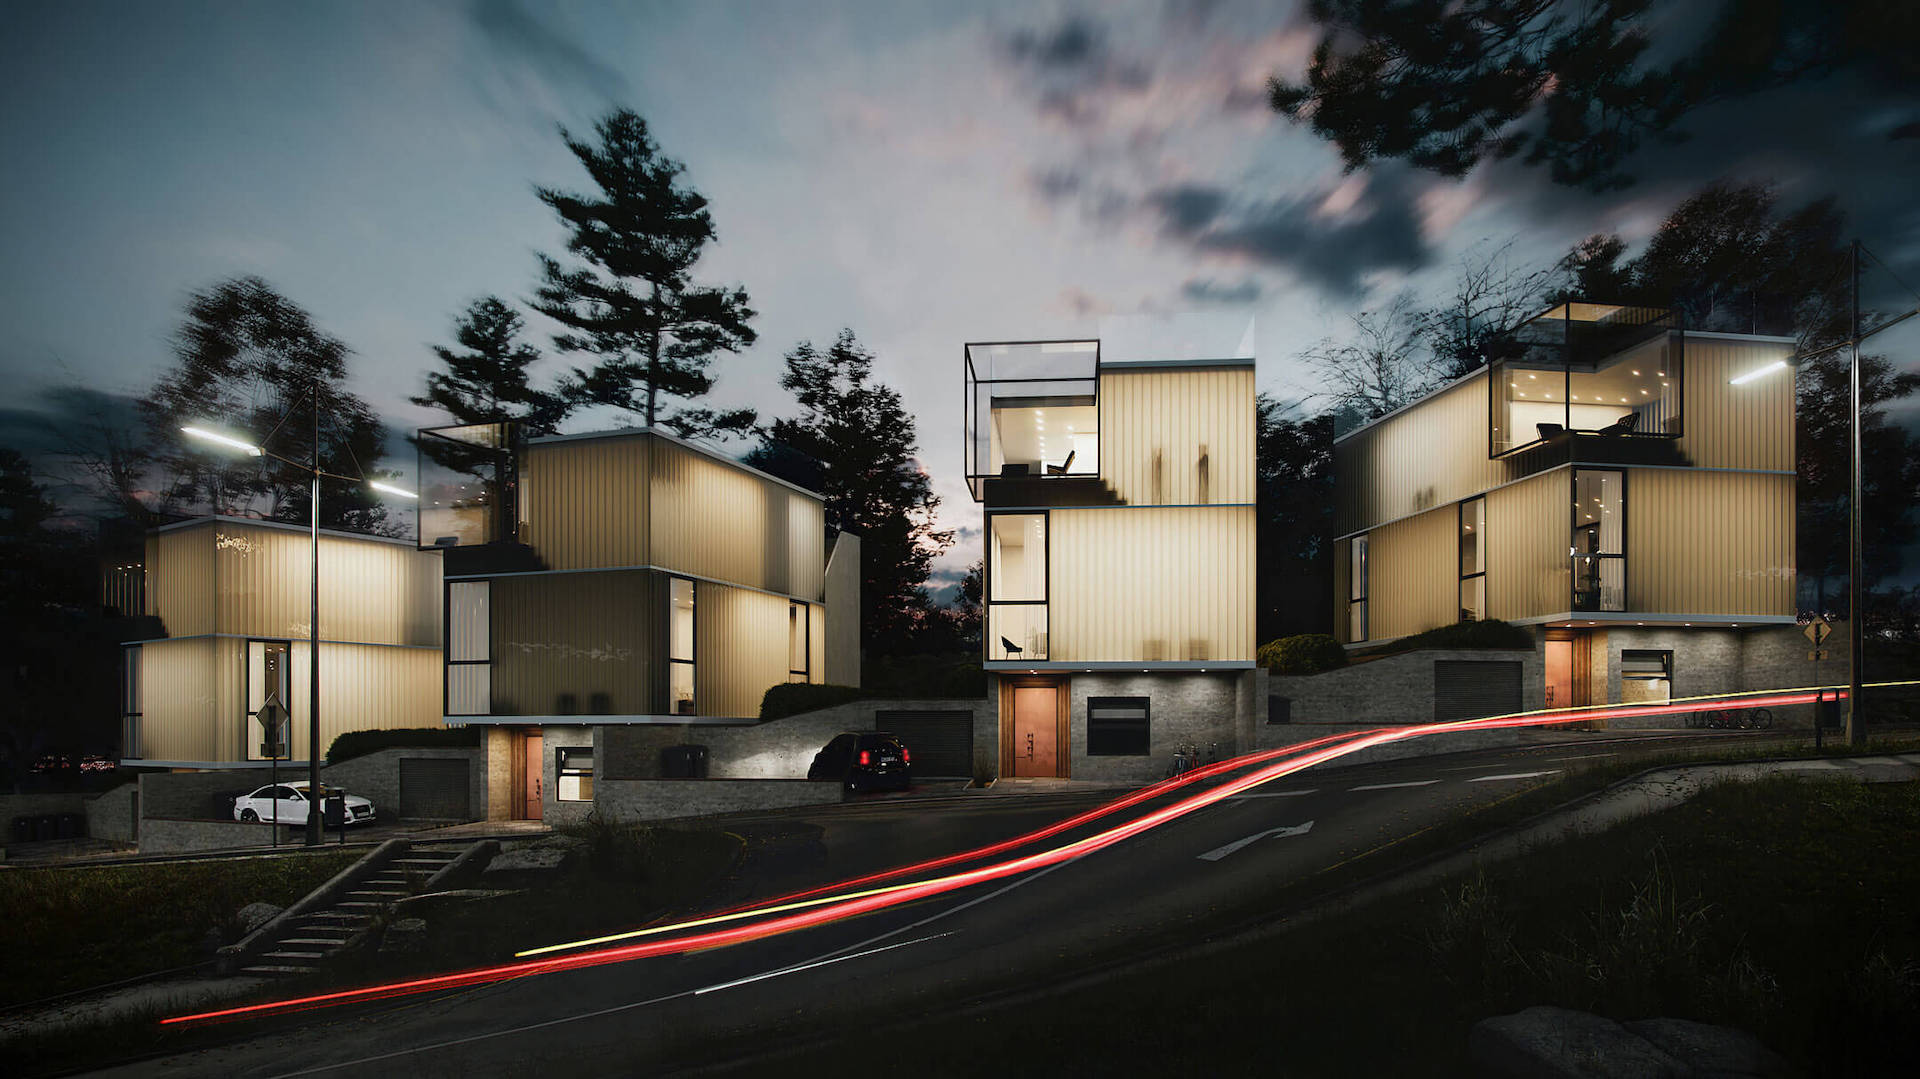 Best Resolution for CG Image of Innovative Housing Complex